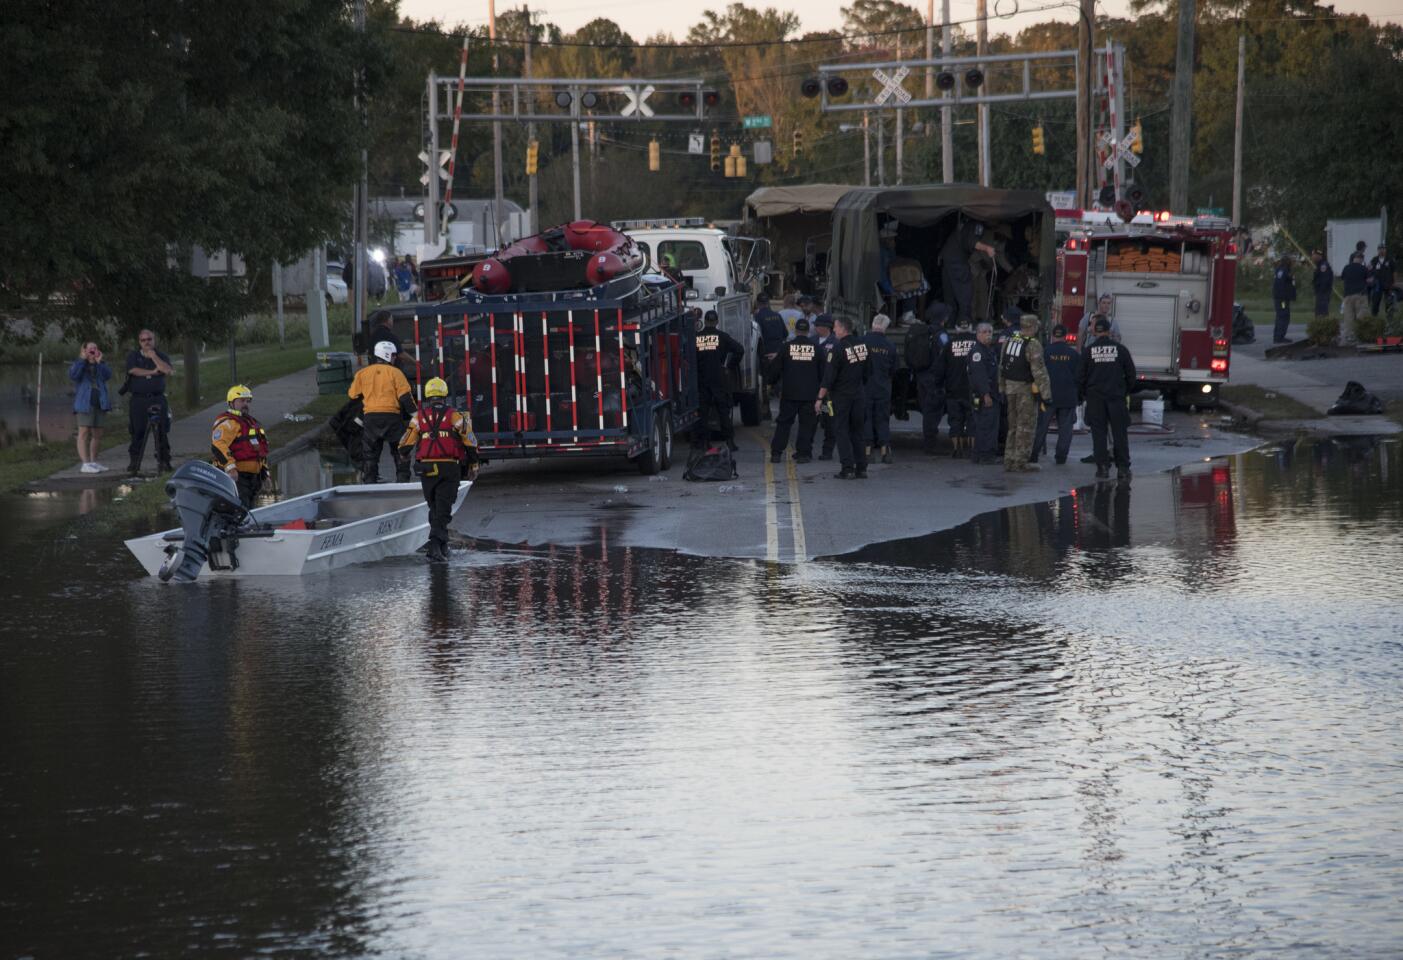 Swift water rescue teams stage at the foot of Martin Luther King Jr. Drive as part of the rescue efforts from floodwaters caused by rain from Hurricane Matthew in Lumberton, North Carolina, on Oct. 10, 2016.